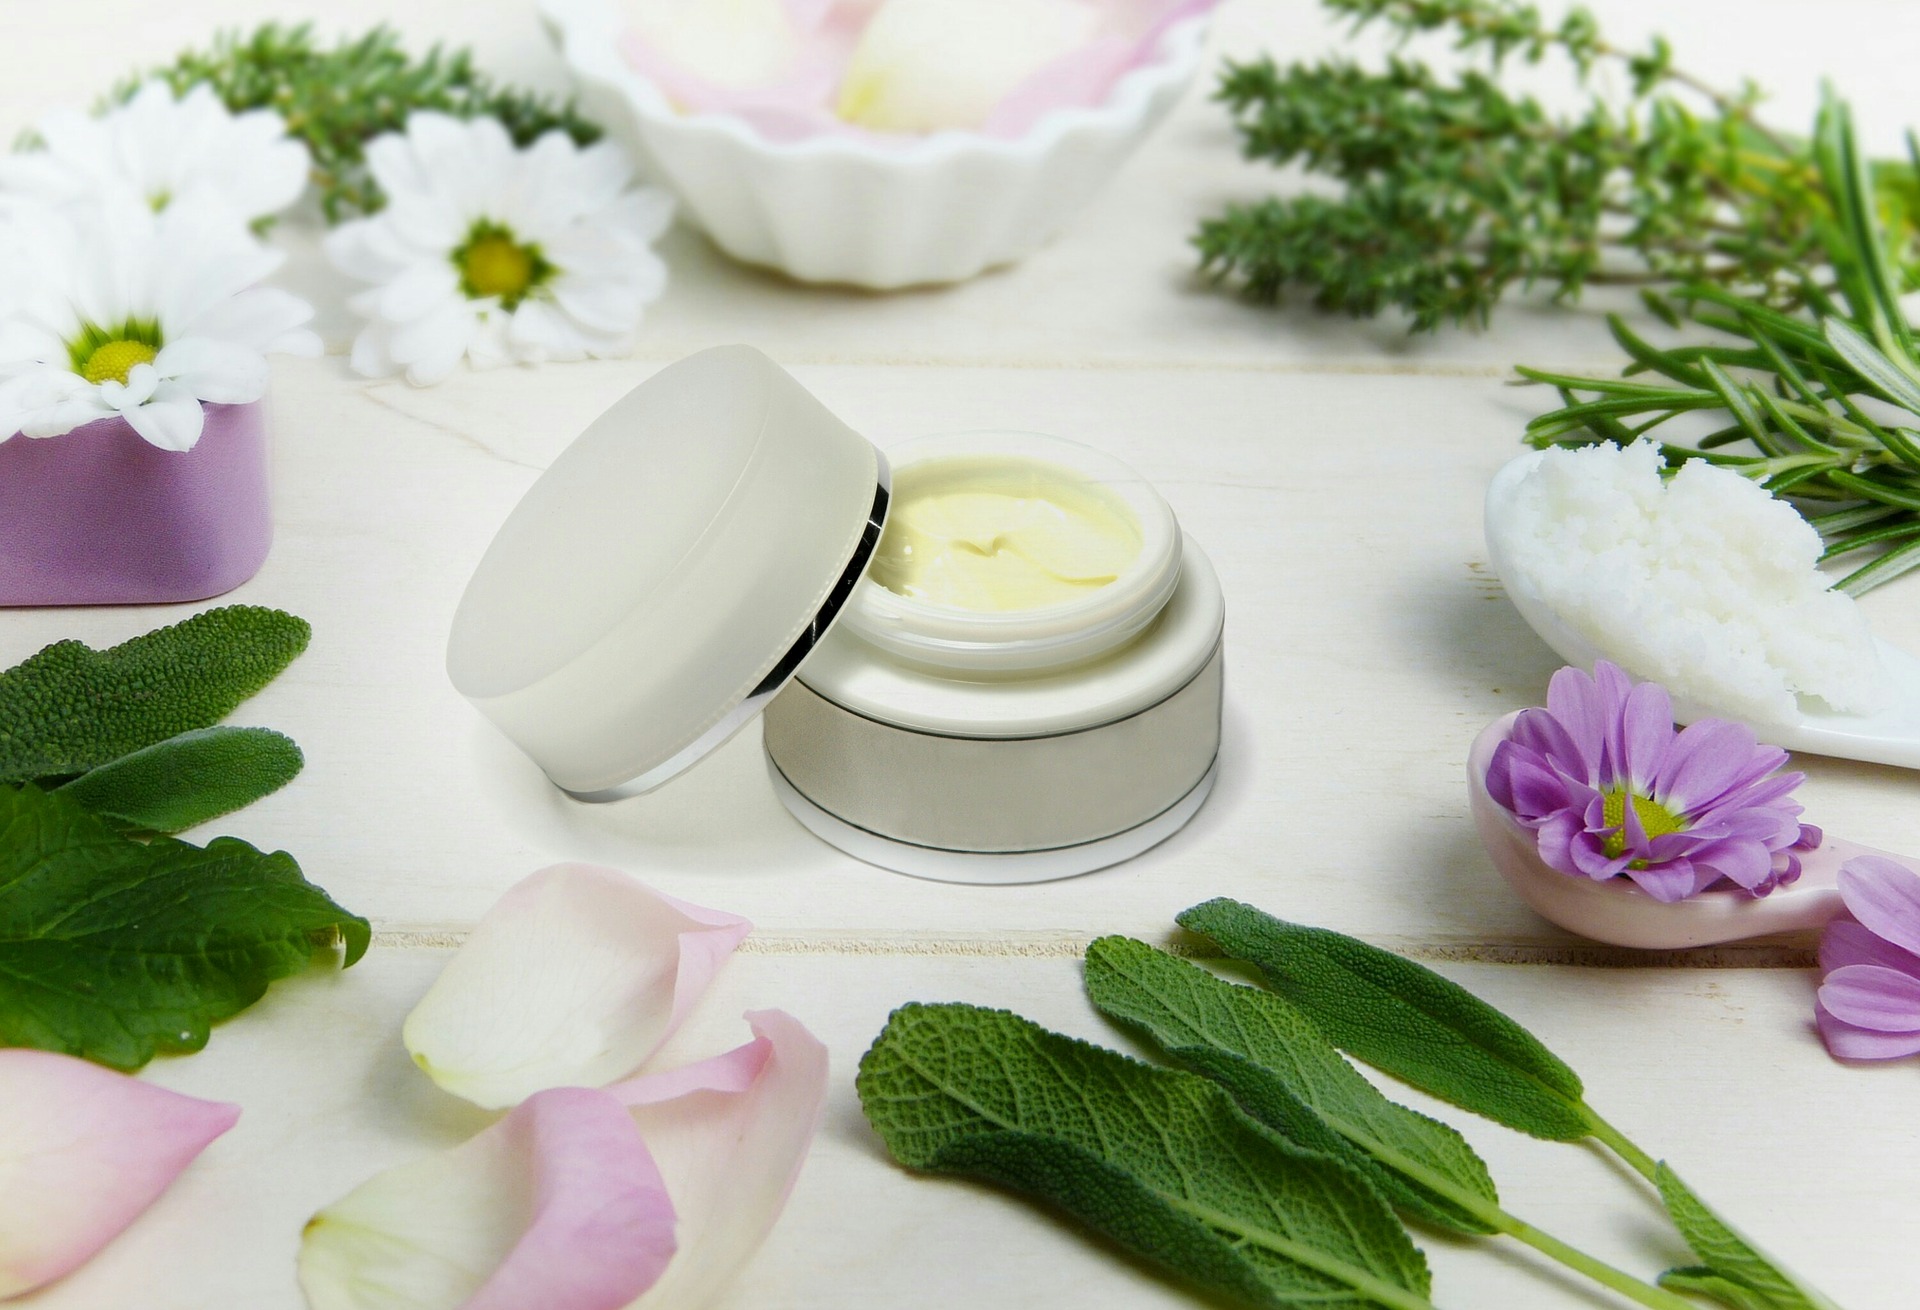 Ranking of the best creams for young skin for 2022